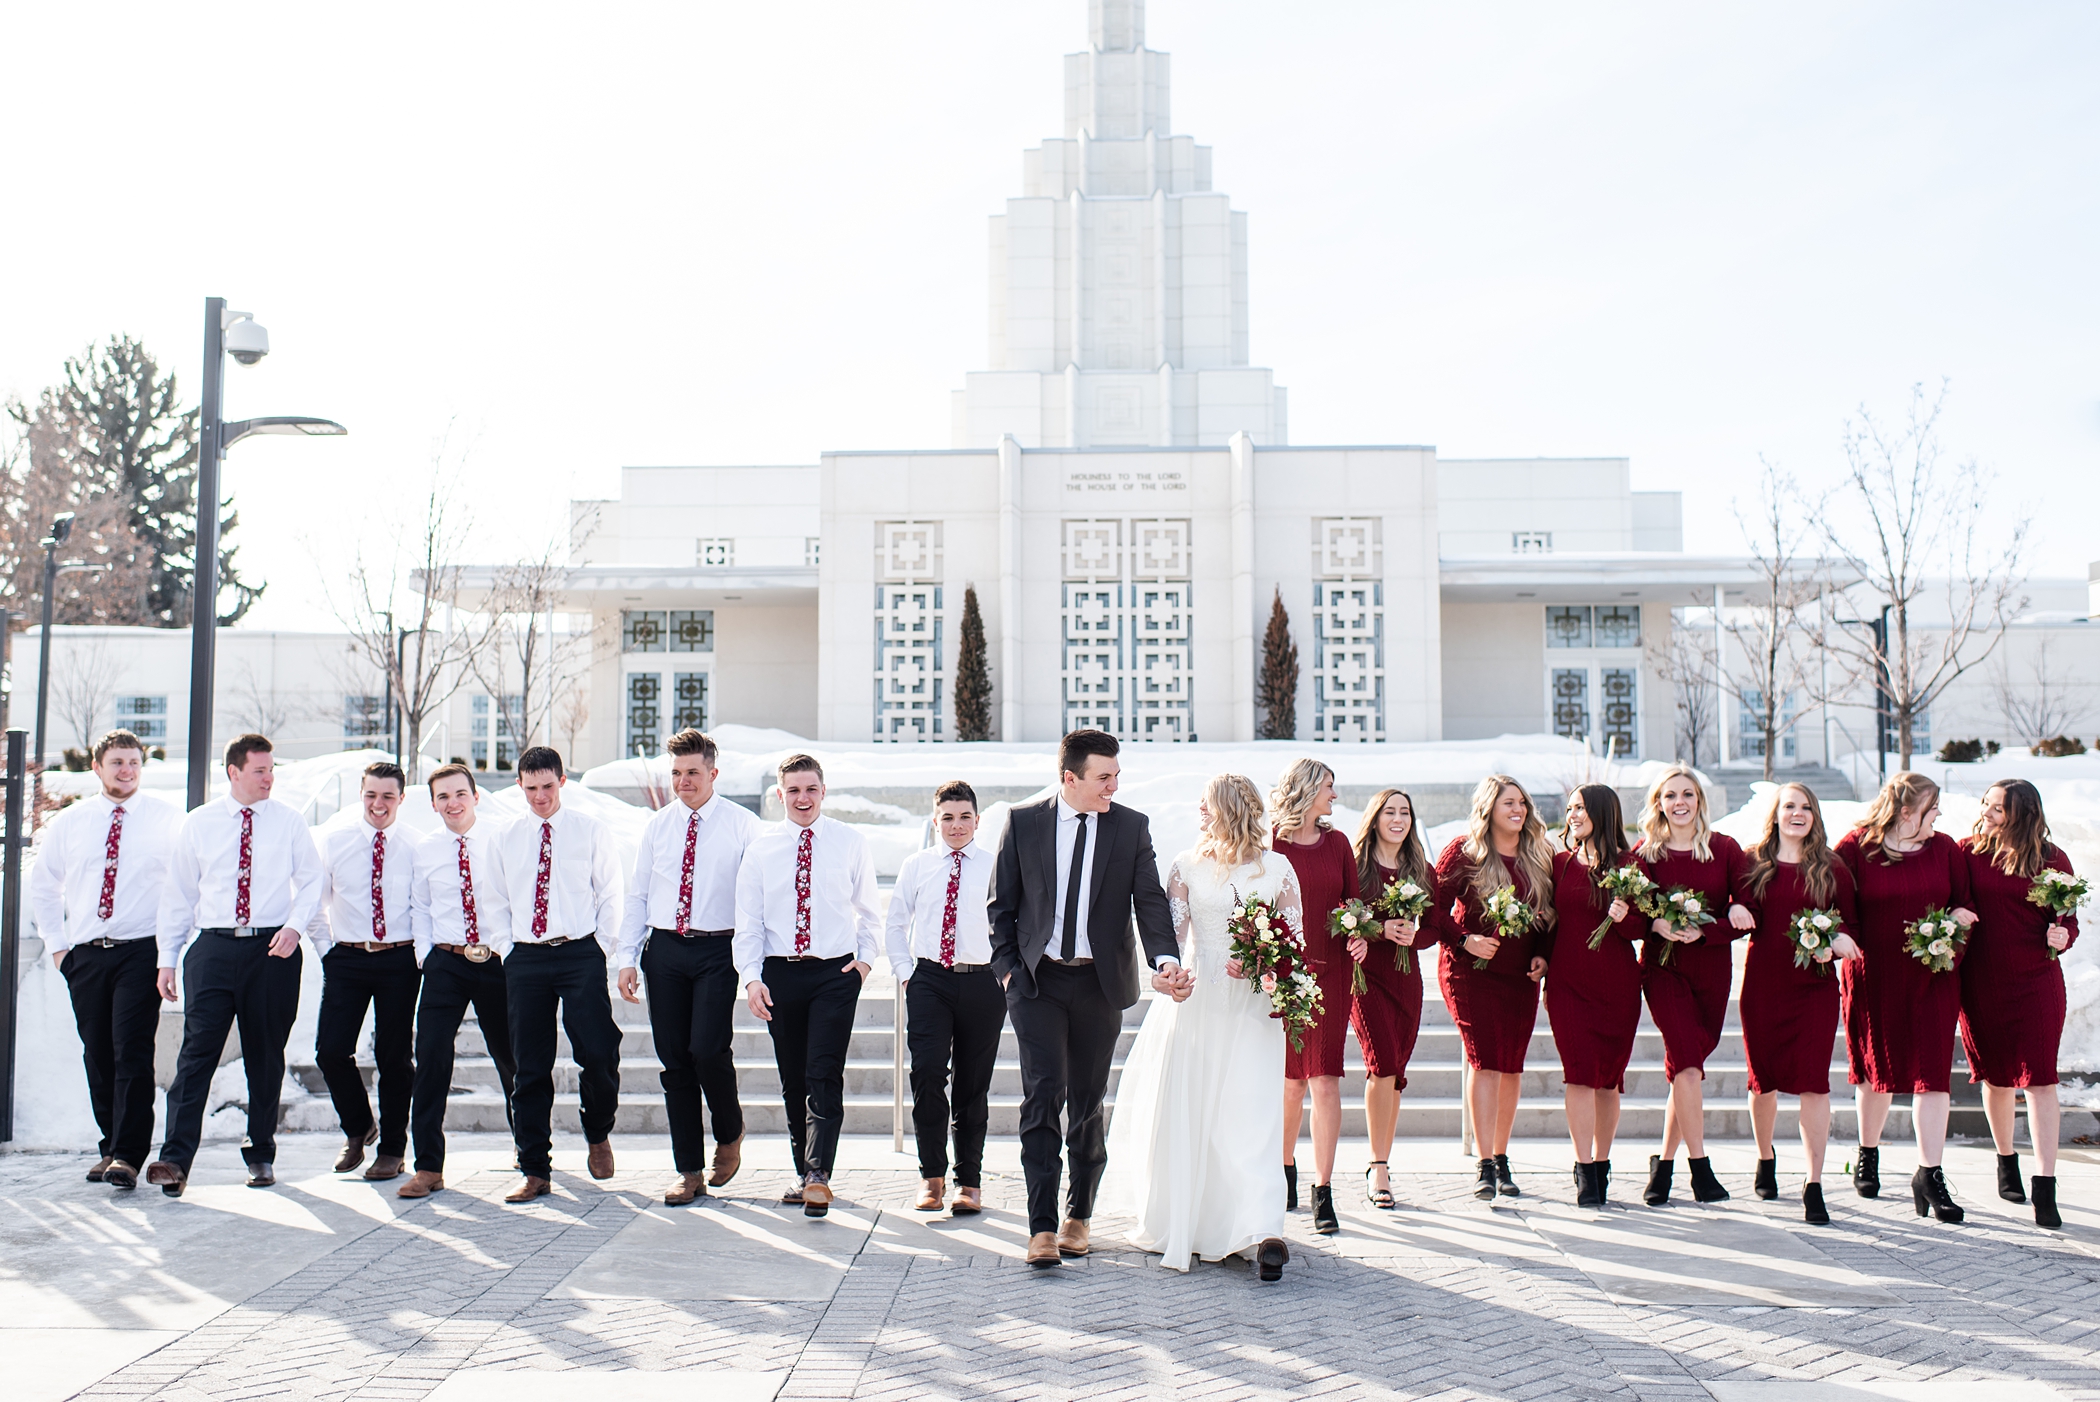 Bridal party in winter colors- burgundy